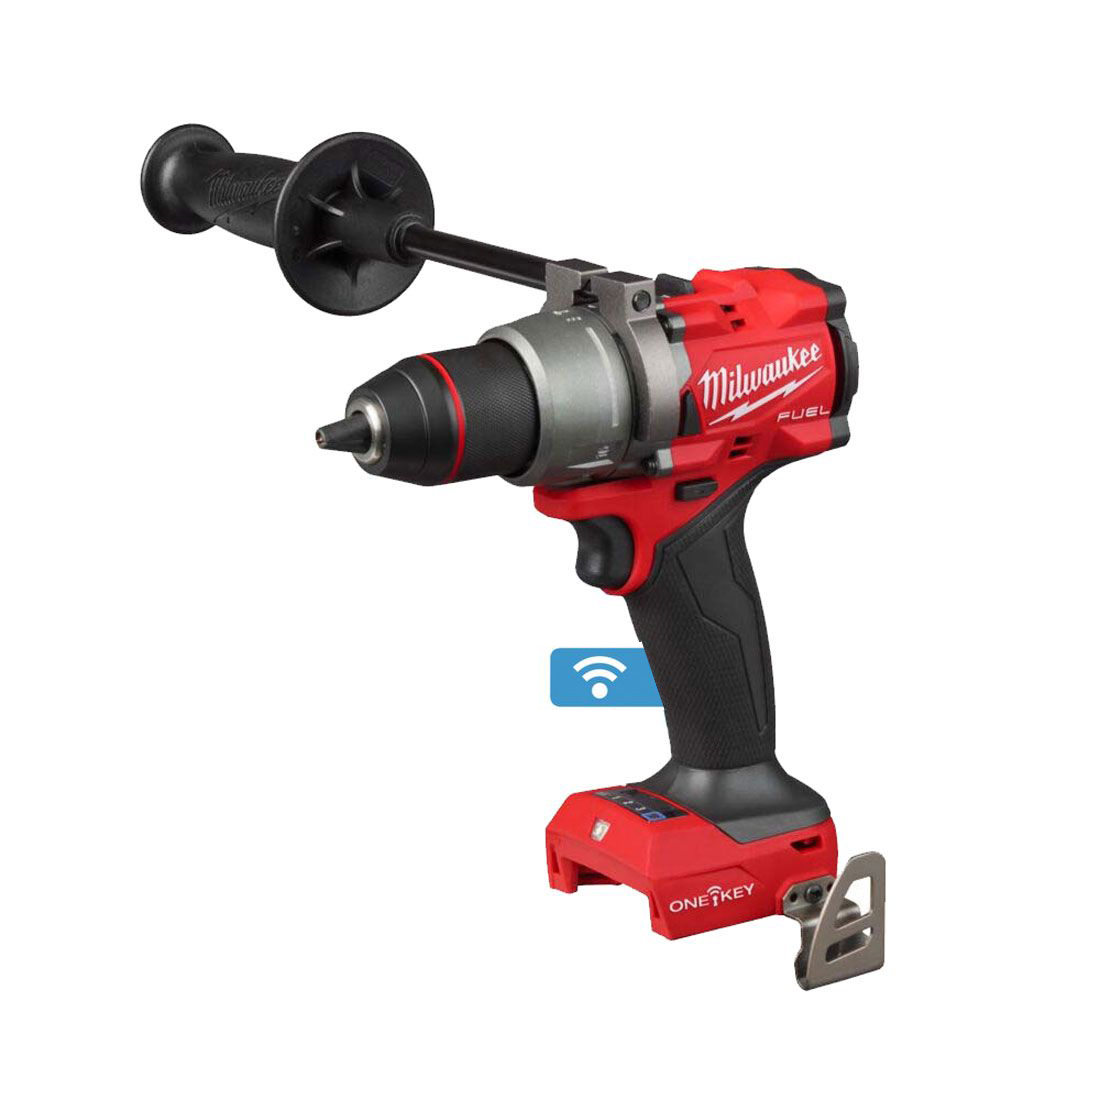 Milwaukee 18V Fuel One-Key Percussion Drill (Combi Drill) - M18ONEPD3-0 - Body Only